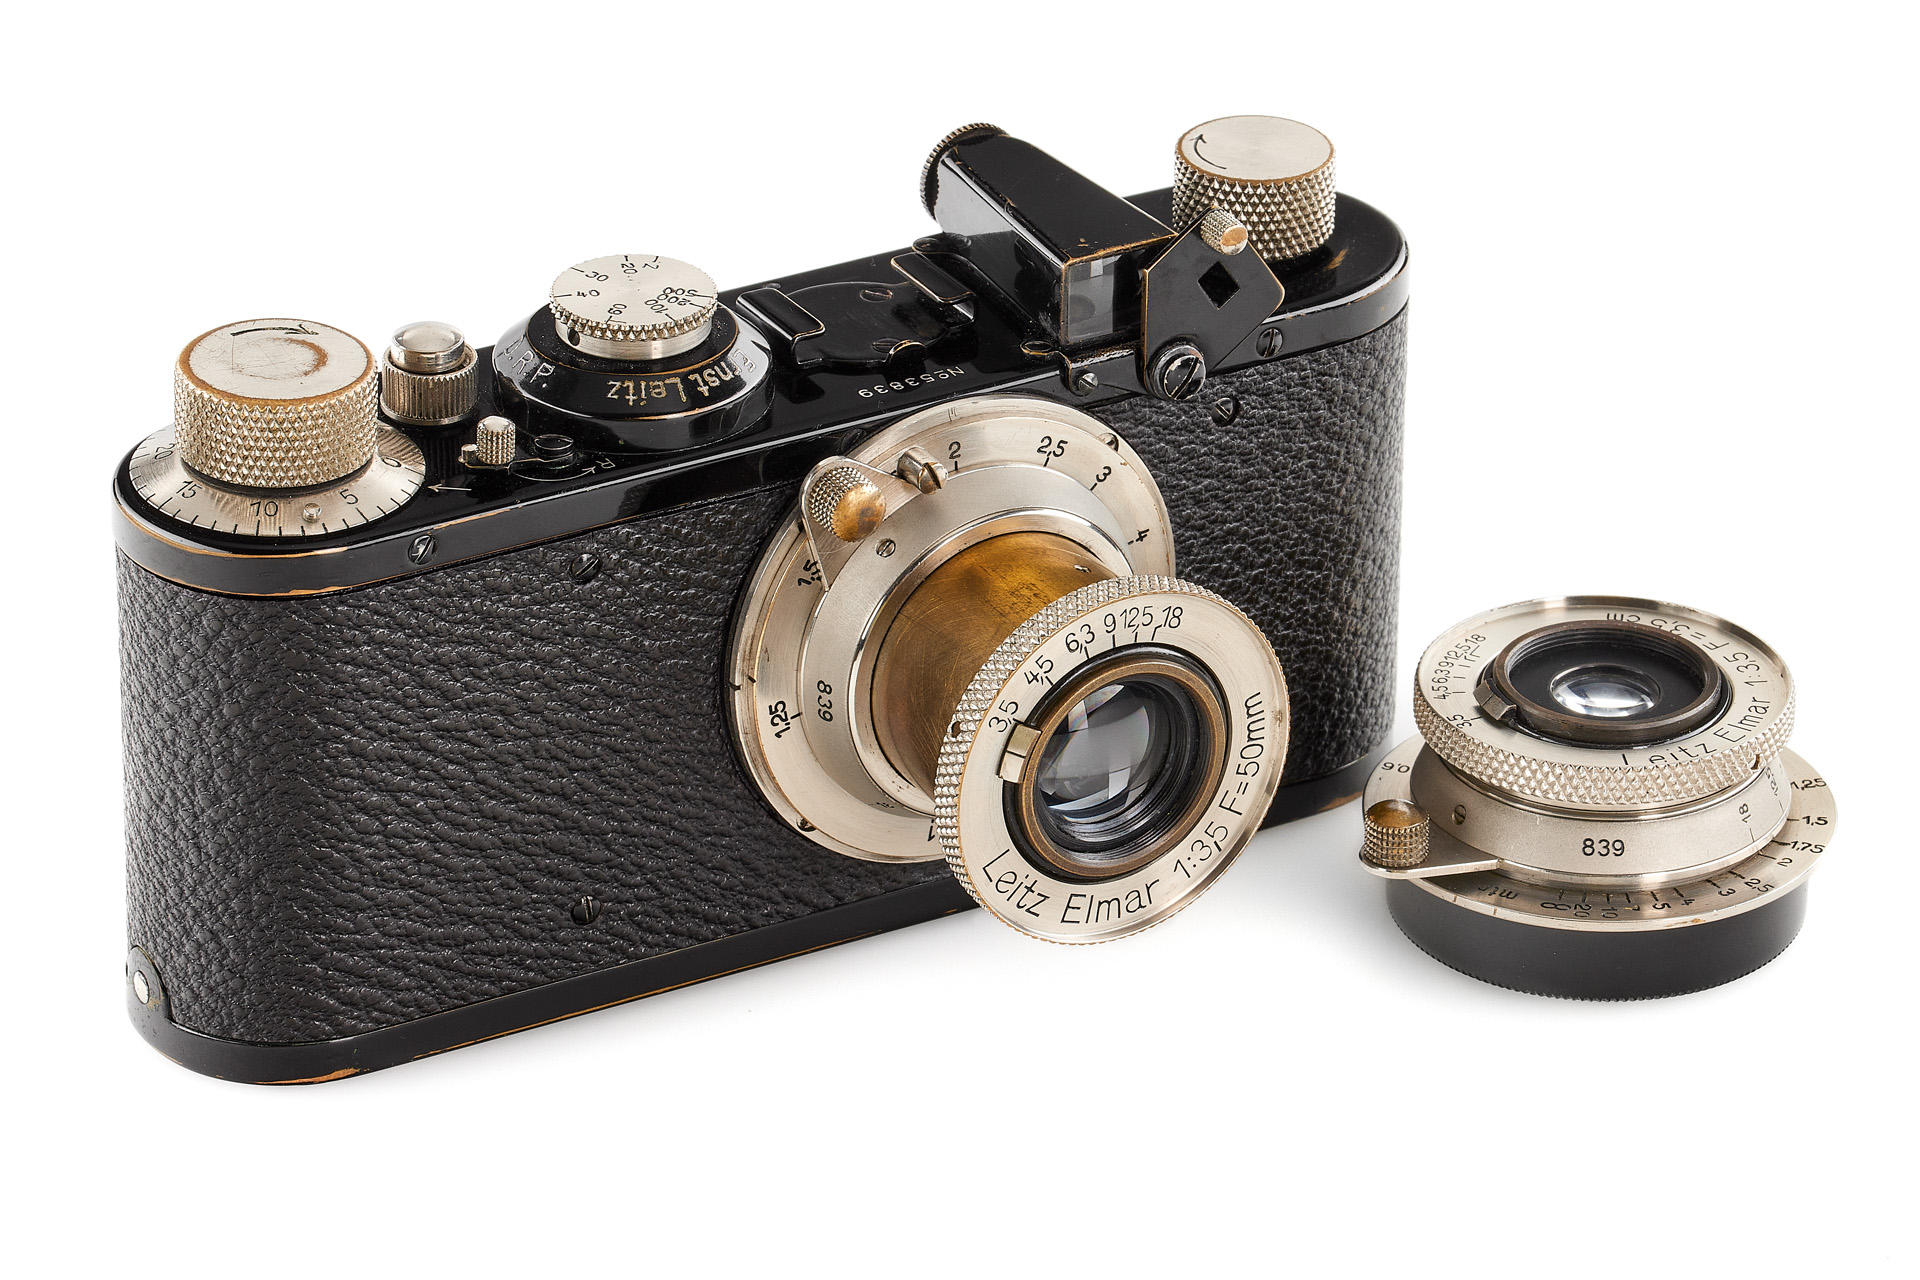 Leica I Mod. C Non-Standard outfit